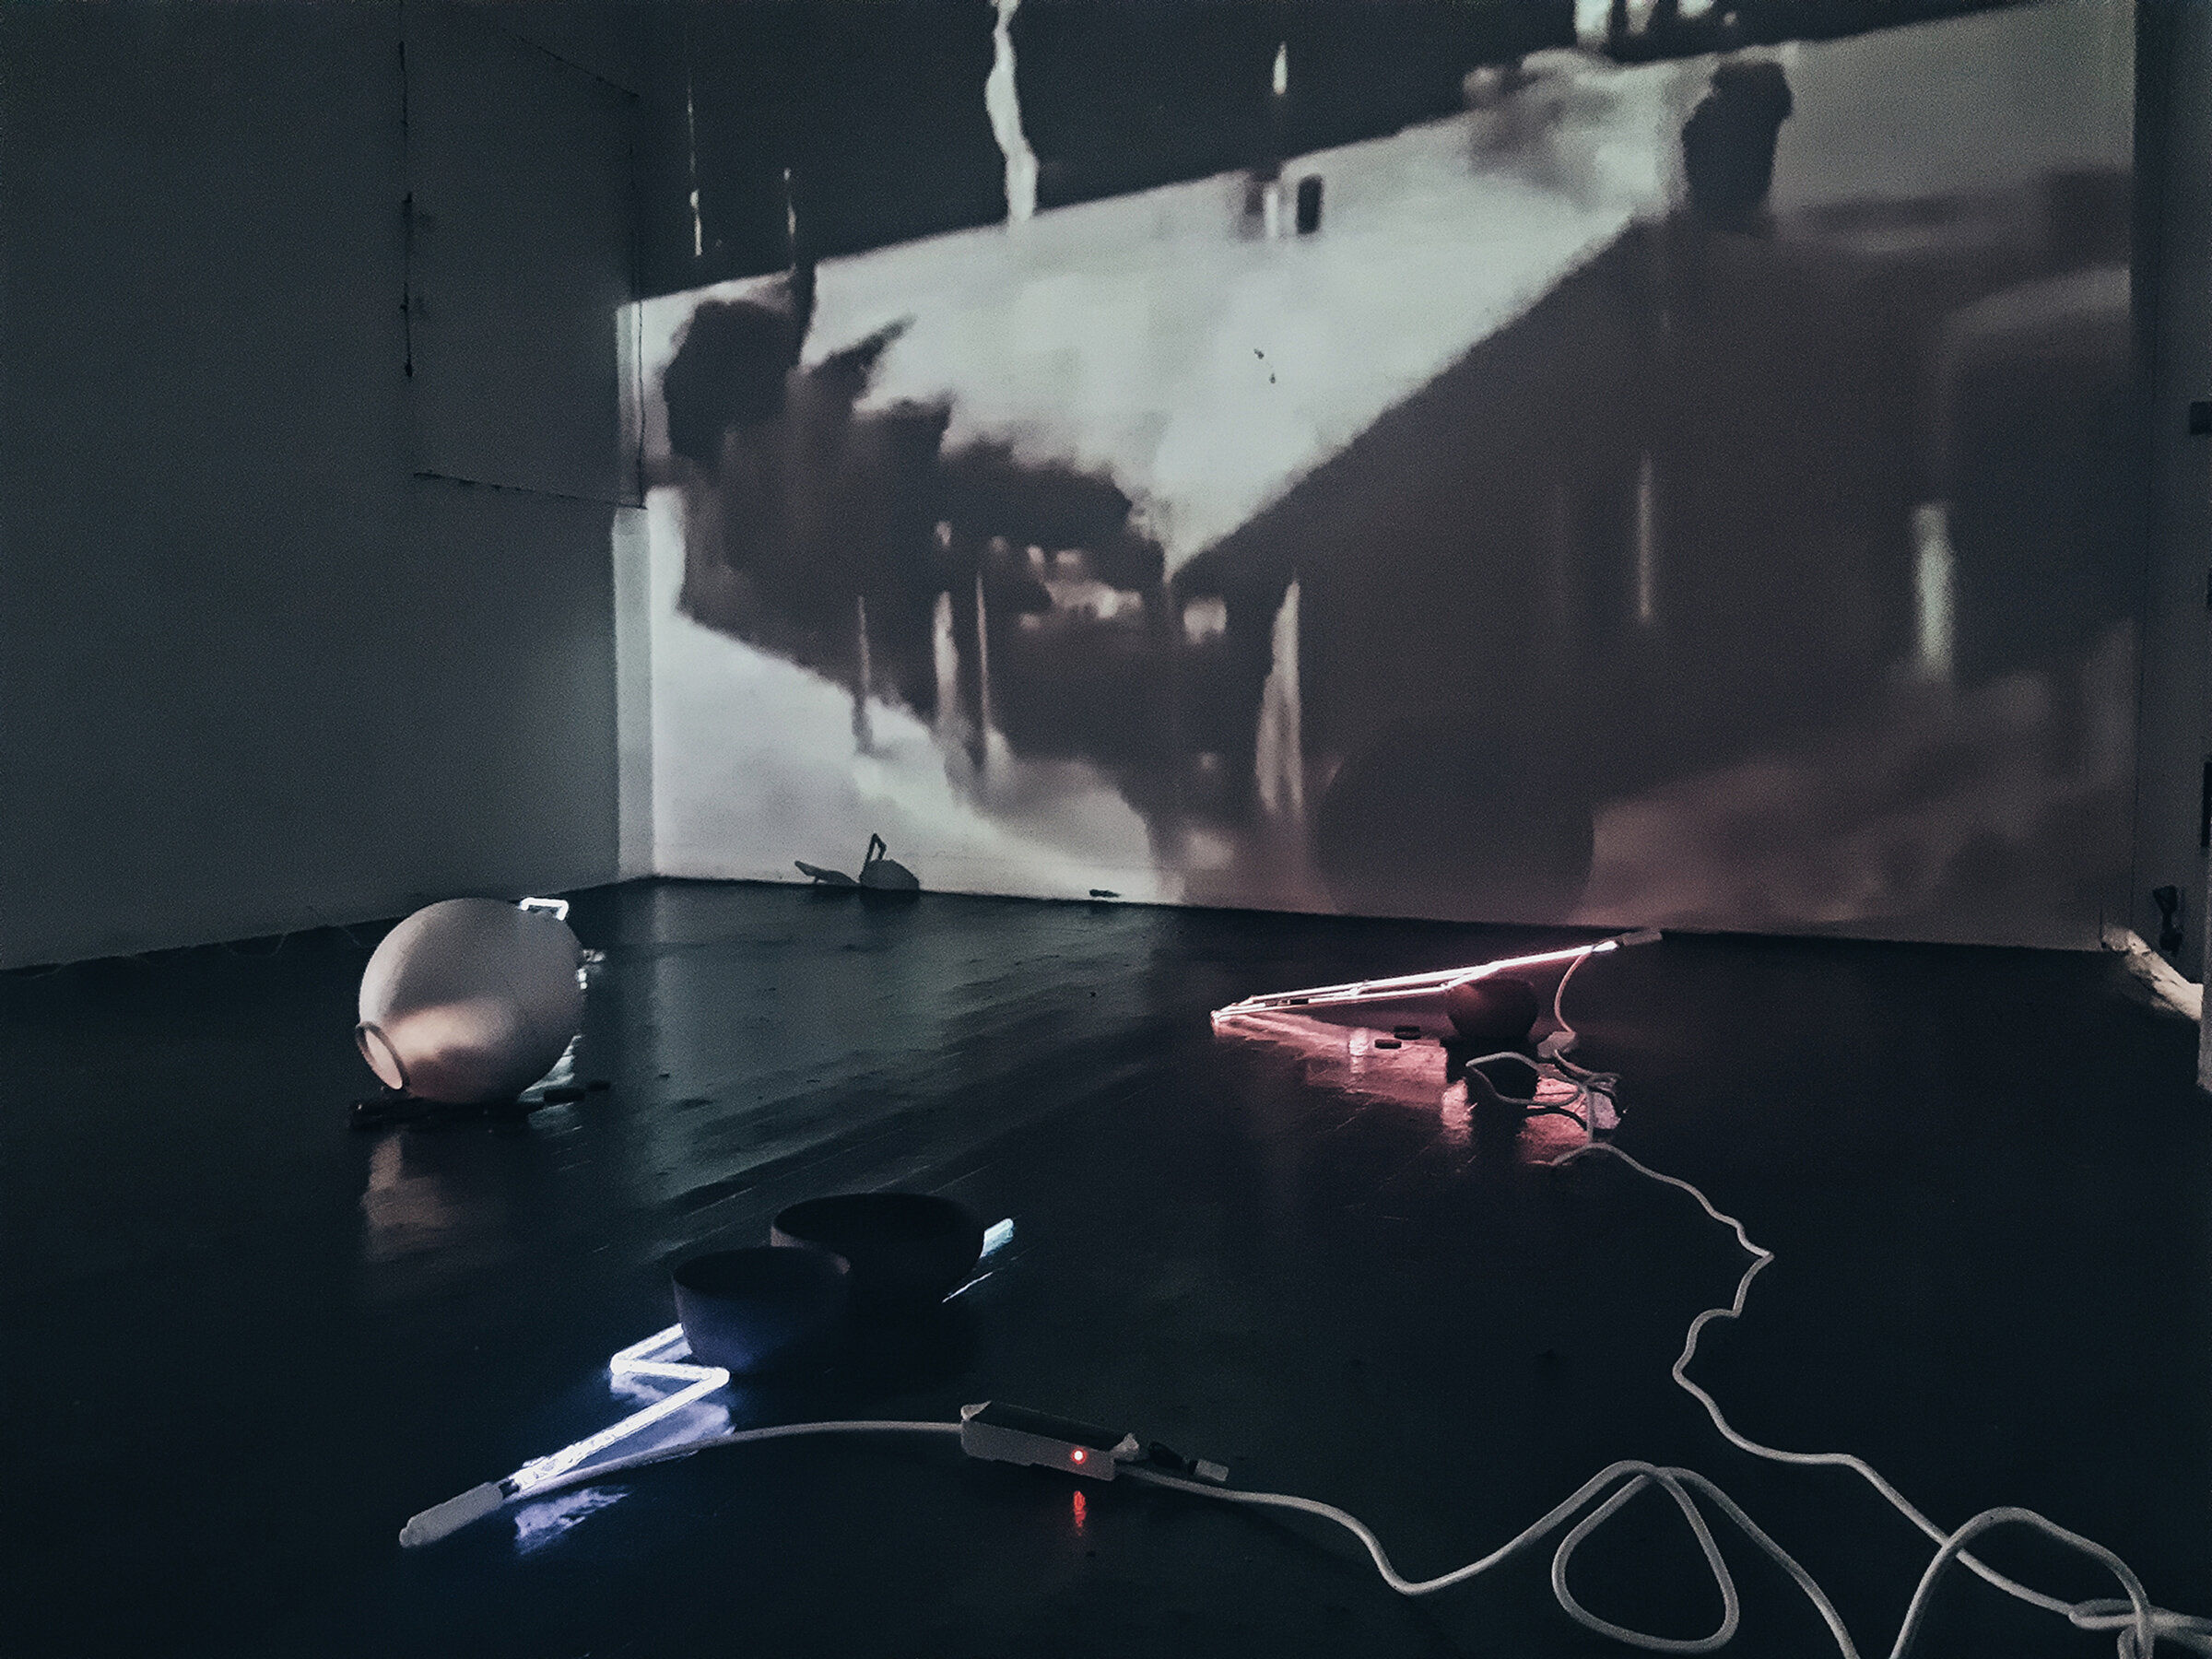 /born ignorant in an abyss of light (installation view), glass, plasma, porcelain, video, 20x30 feet, 2020